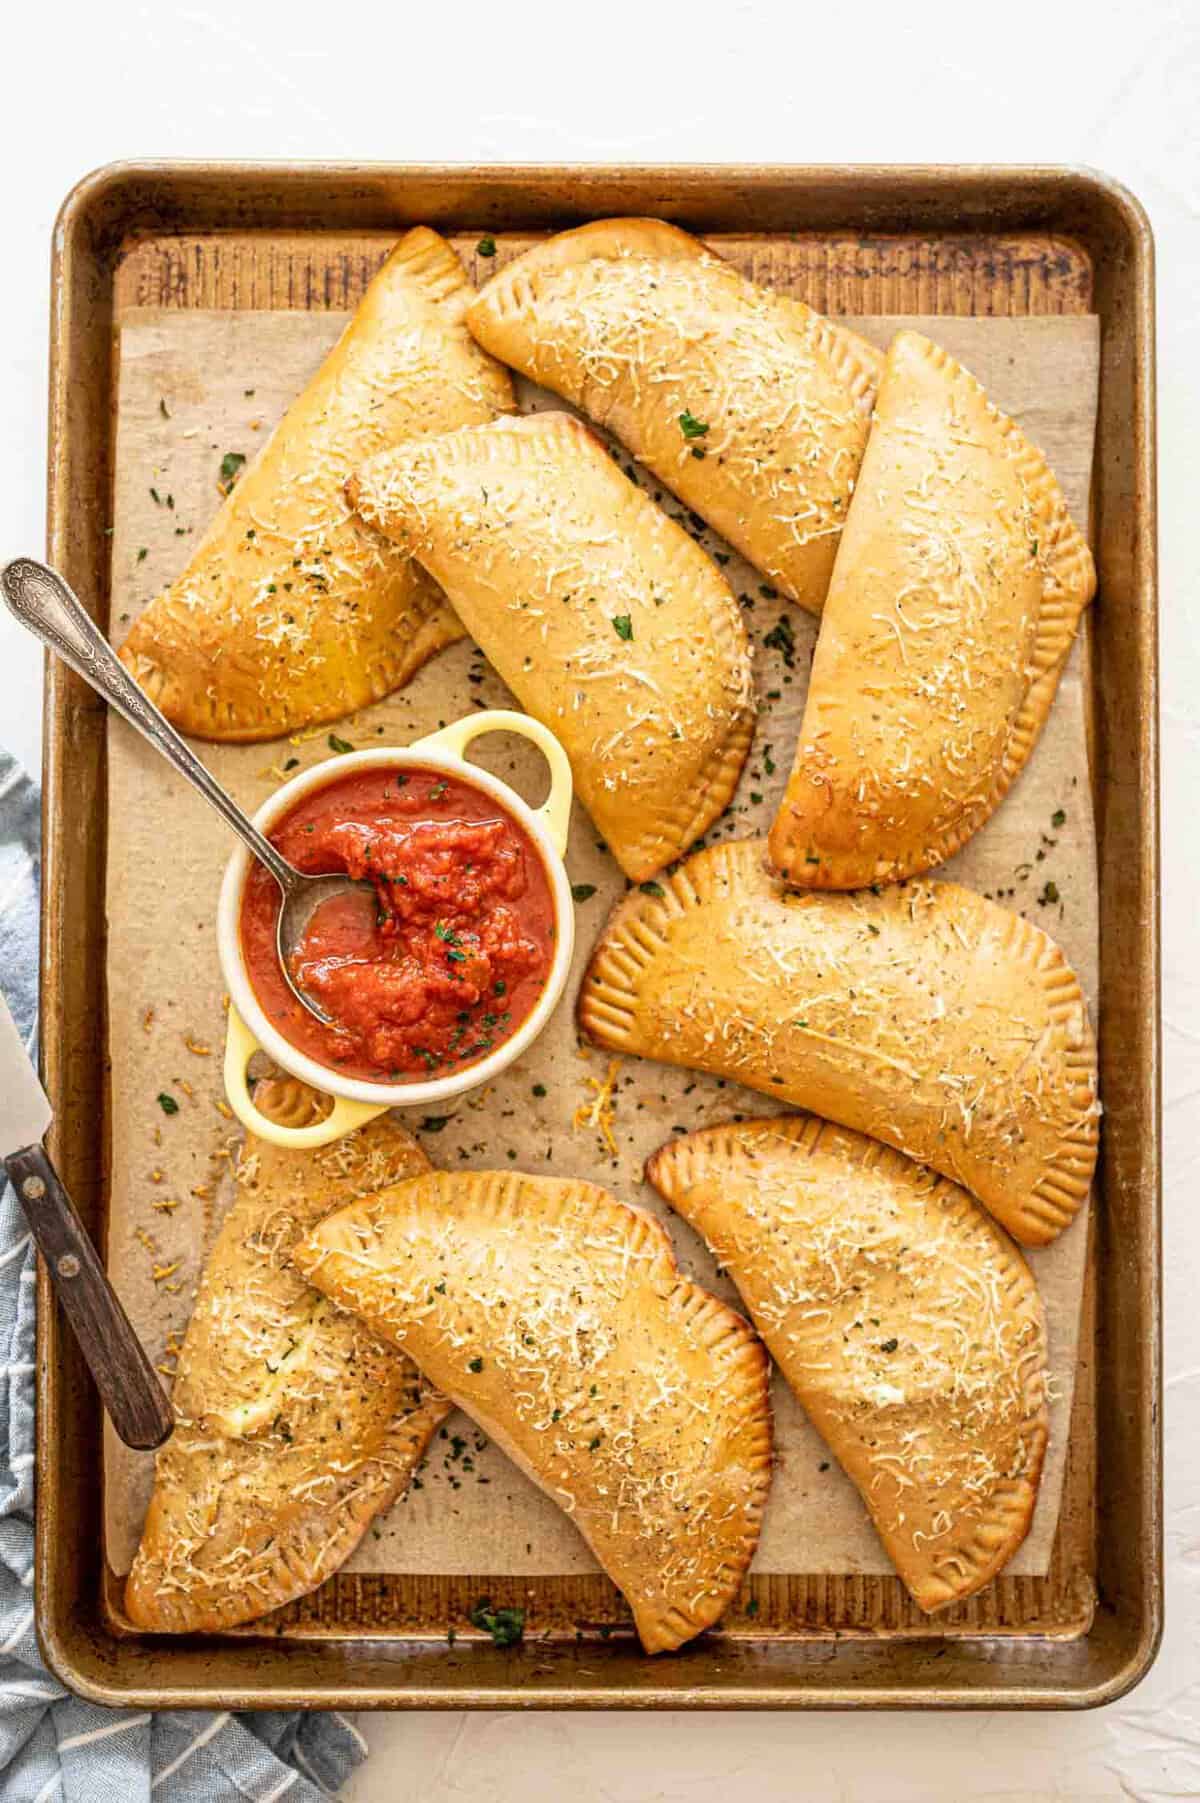 Calzones on baking sheet after being baked with parmesan and parsley sprinkled on top